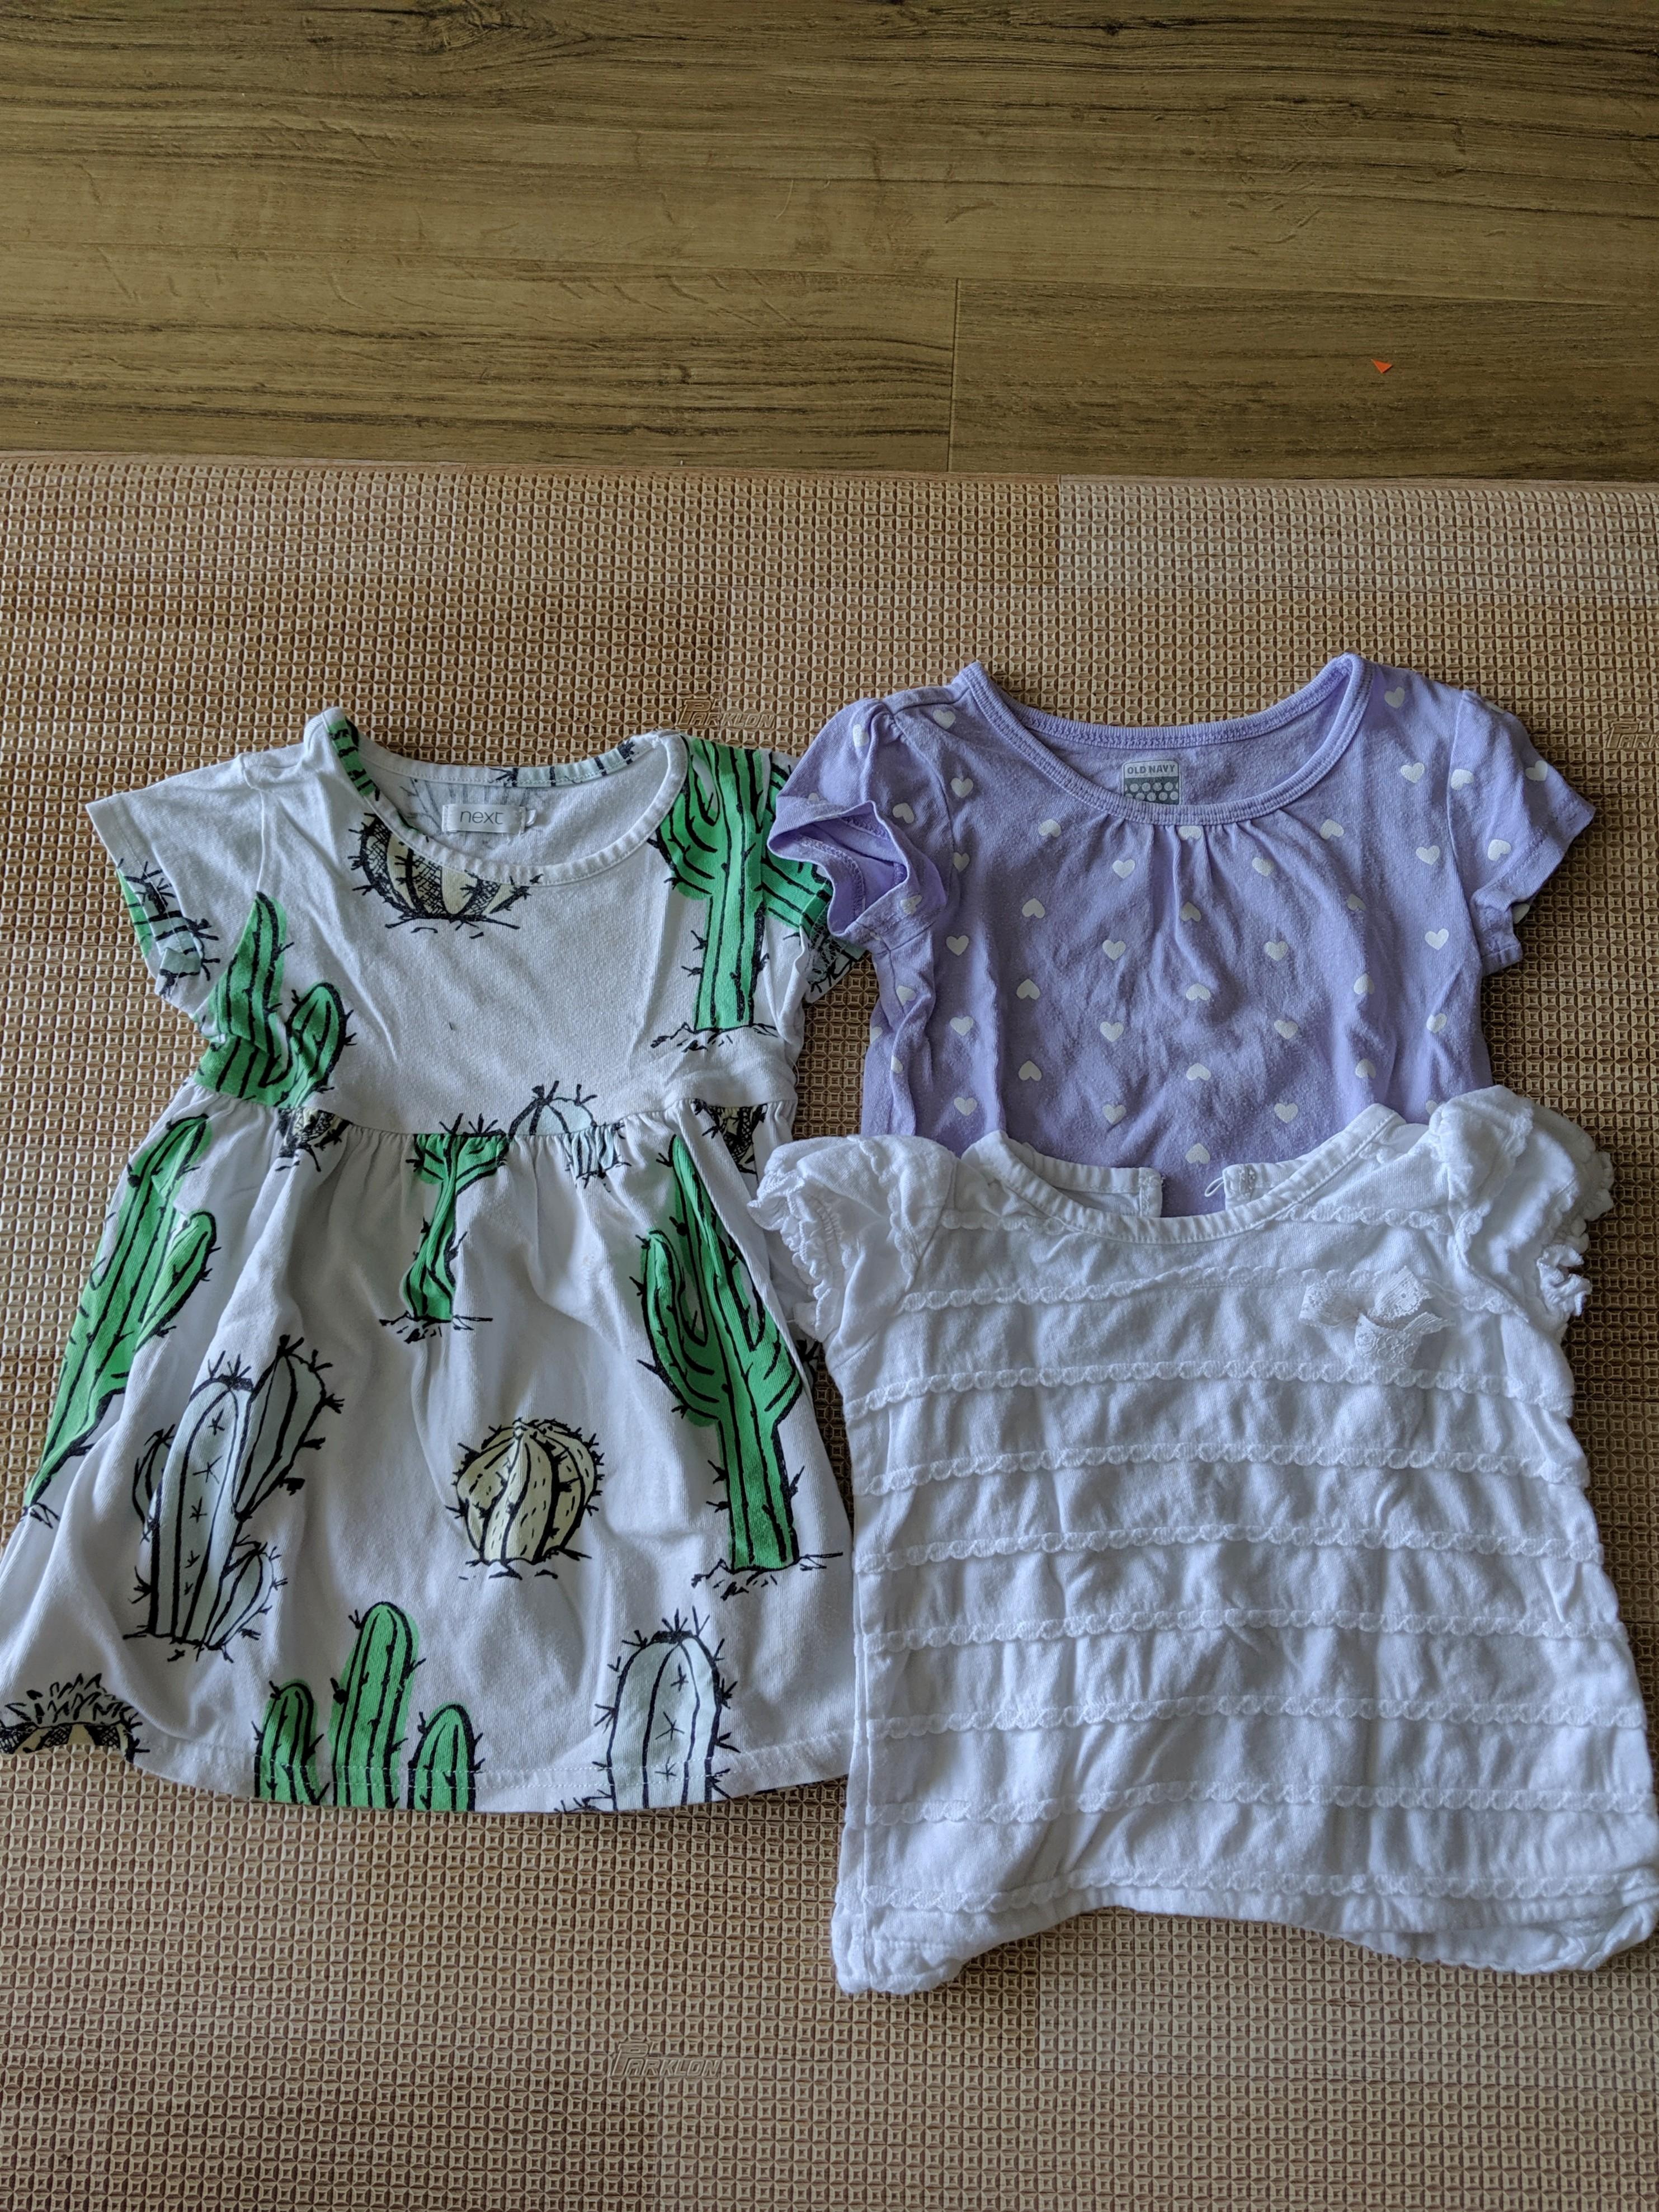 month baby girl clothes (Next, Old Navy 